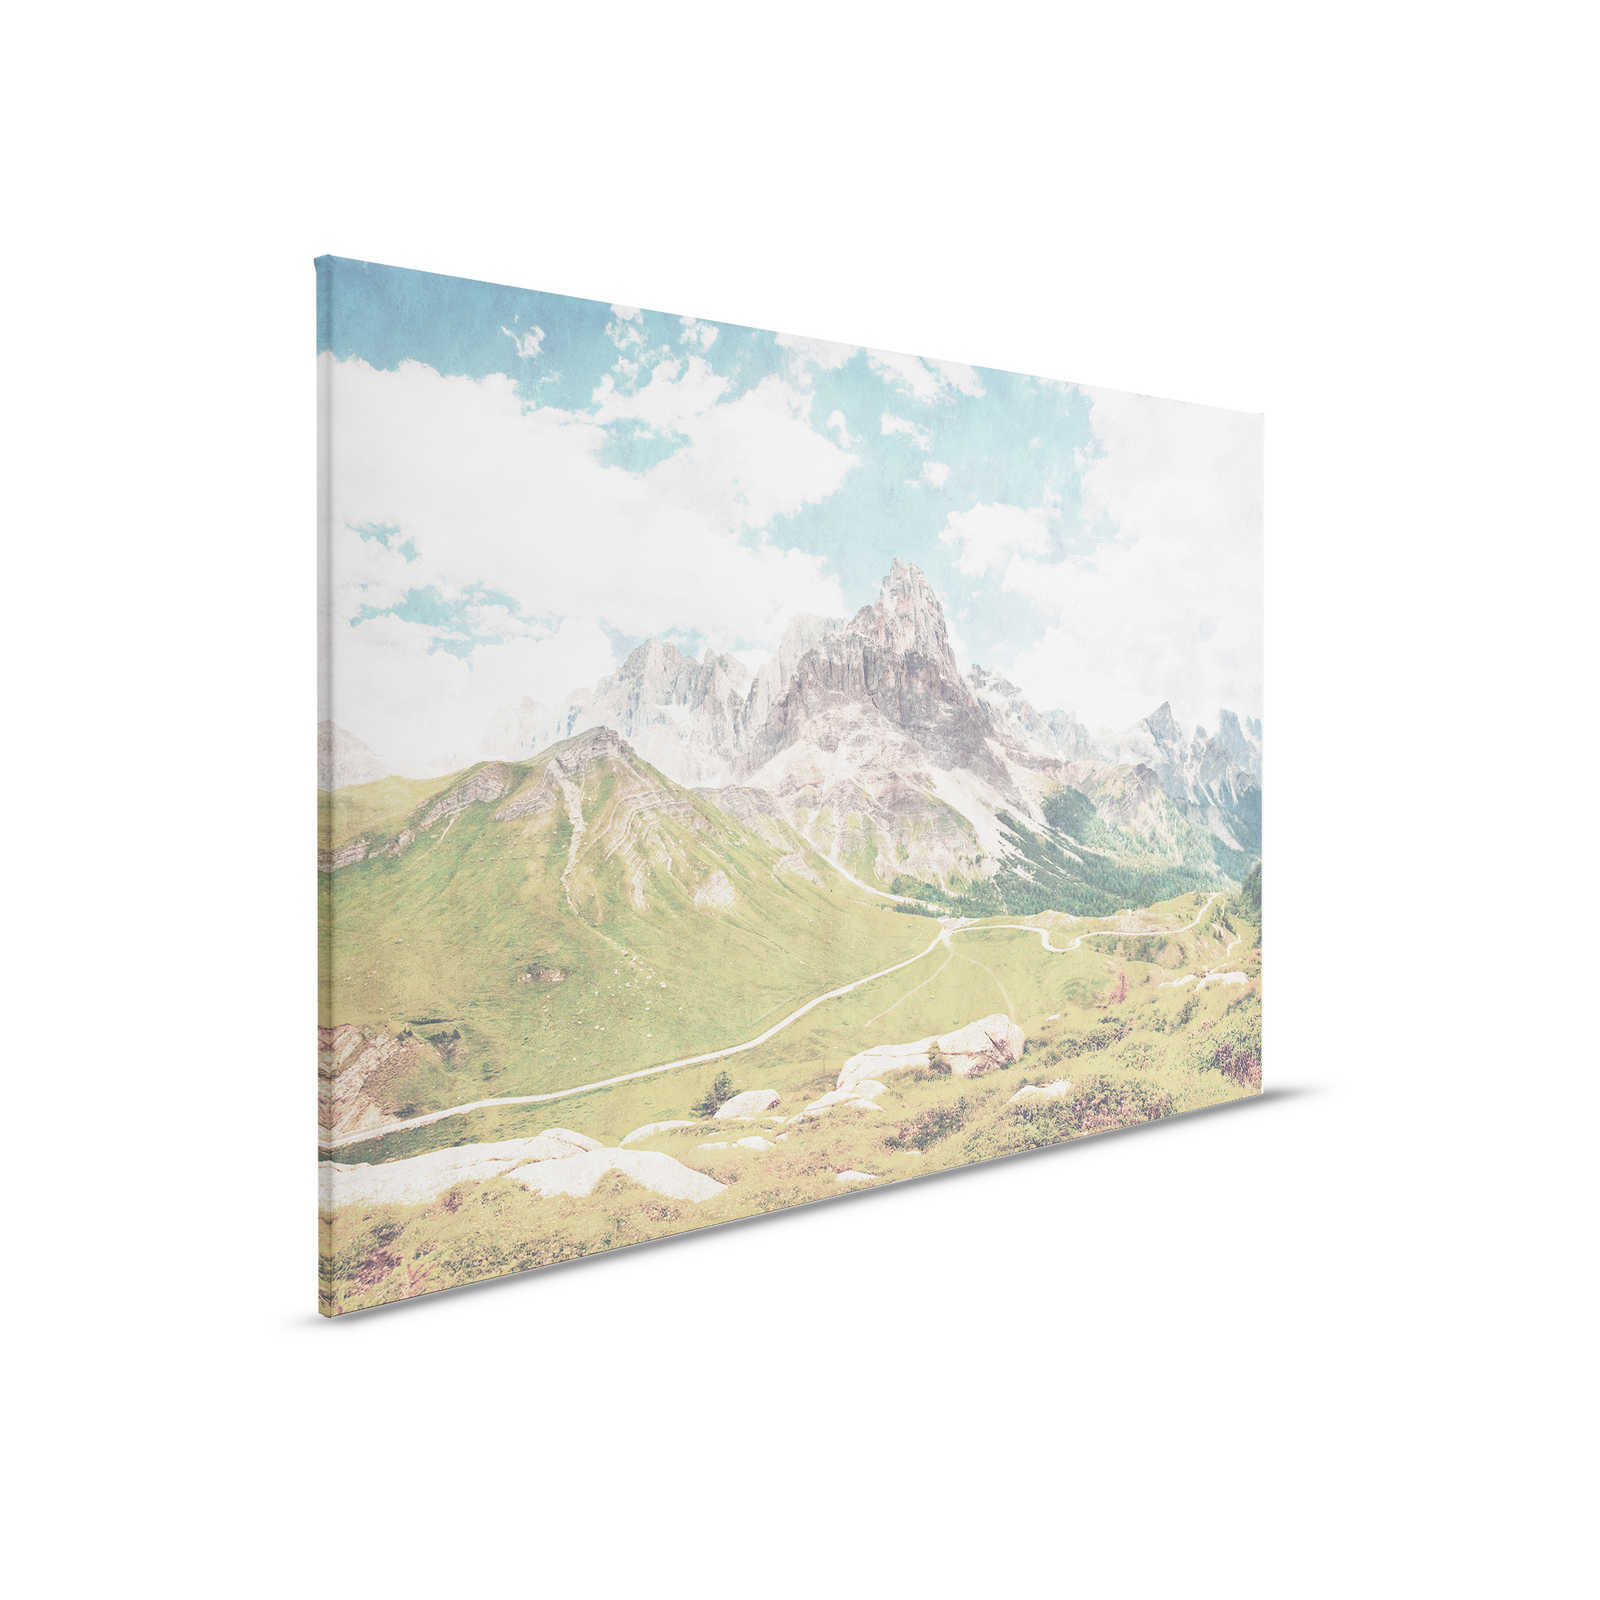         Dolomiti 2 - Canvas painting Dolomites retro photography in blotting paper structure - 0,90 m x 0,60 m
    